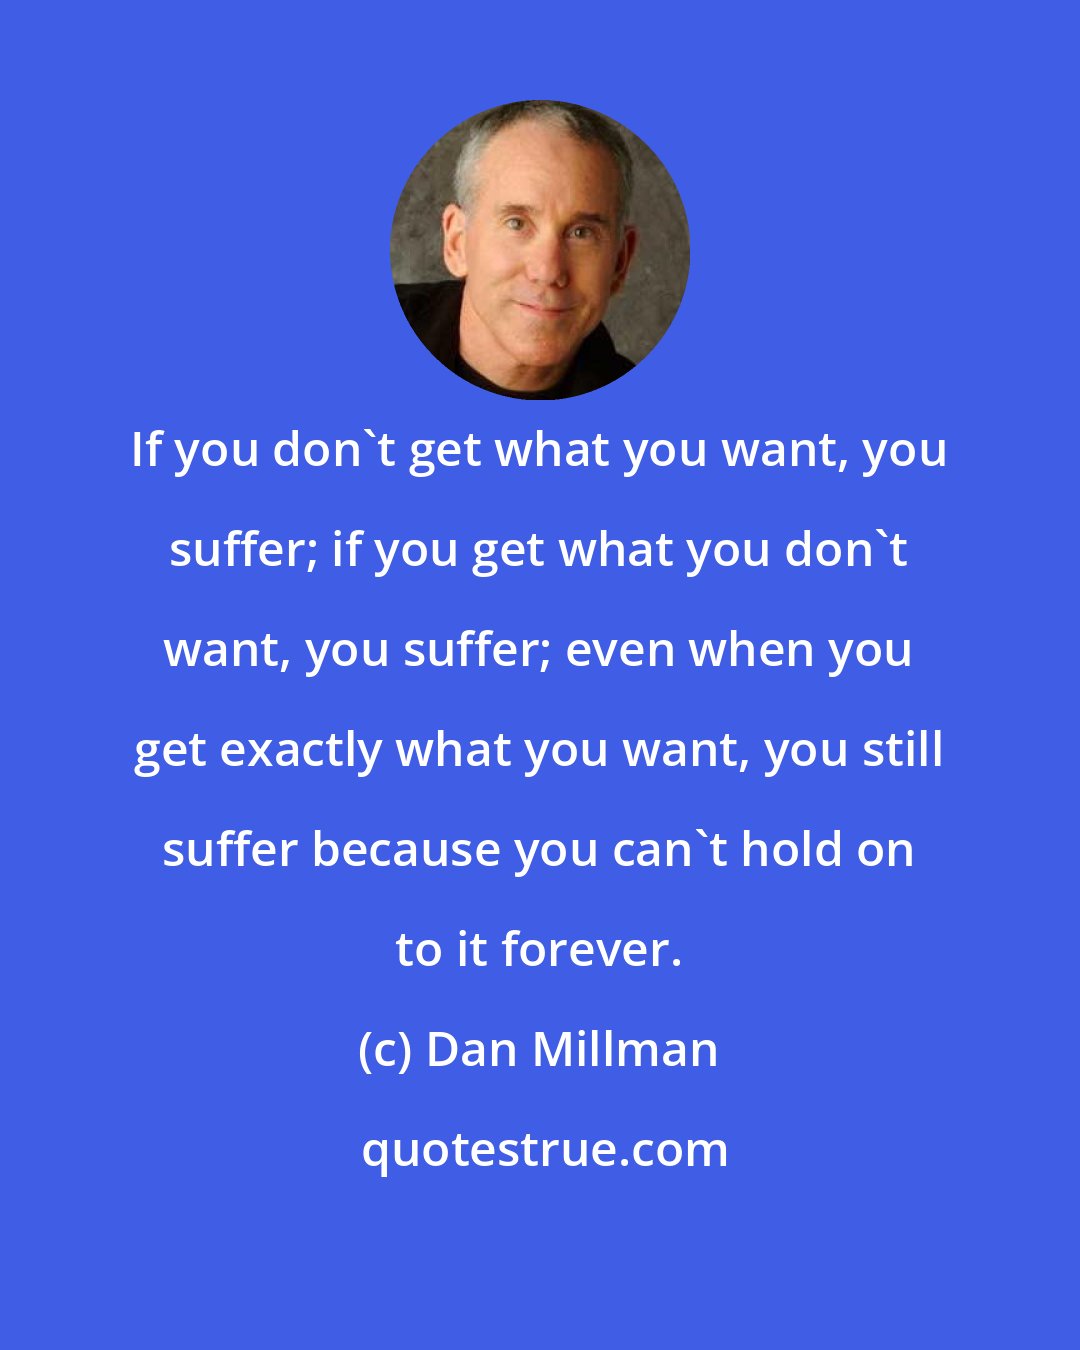 Dan Millman: If you don't get what you want, you suffer; if you get what you don't want, you suffer; even when you get exactly what you want, you still suffer because you can't hold on to it forever.